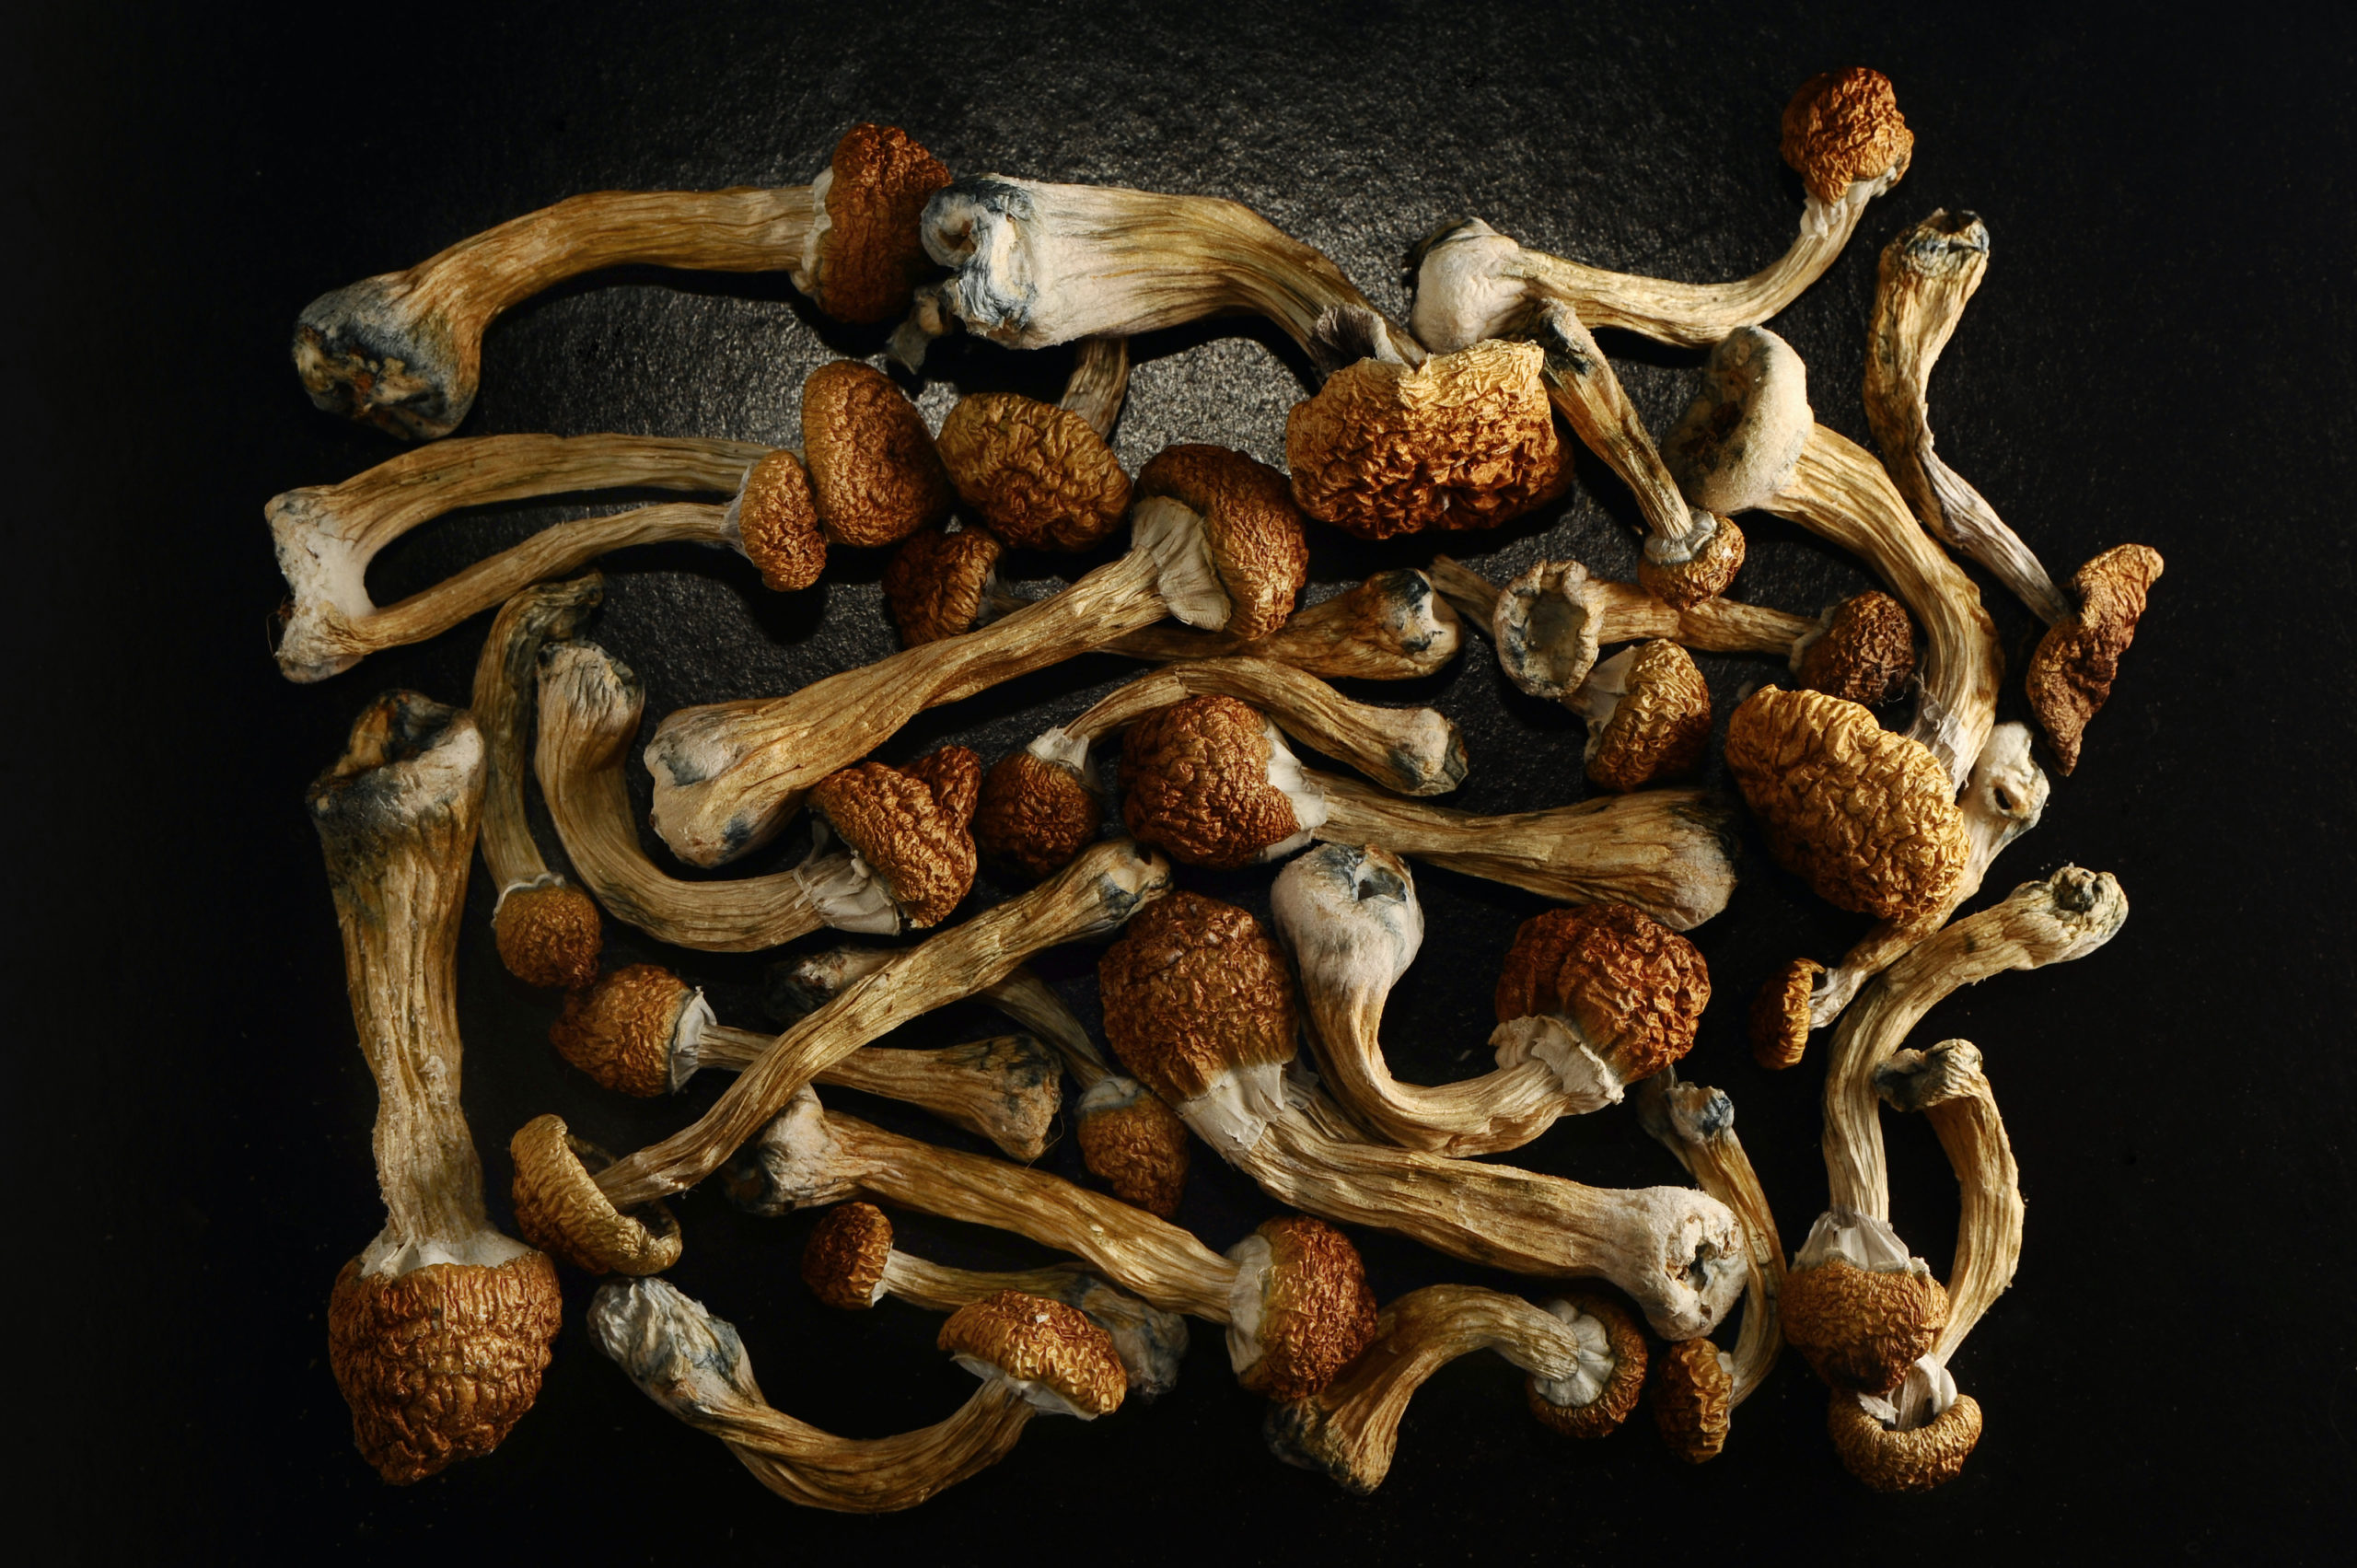 Golden Teachers Mushrooms: What Are They, And Are They Legal?